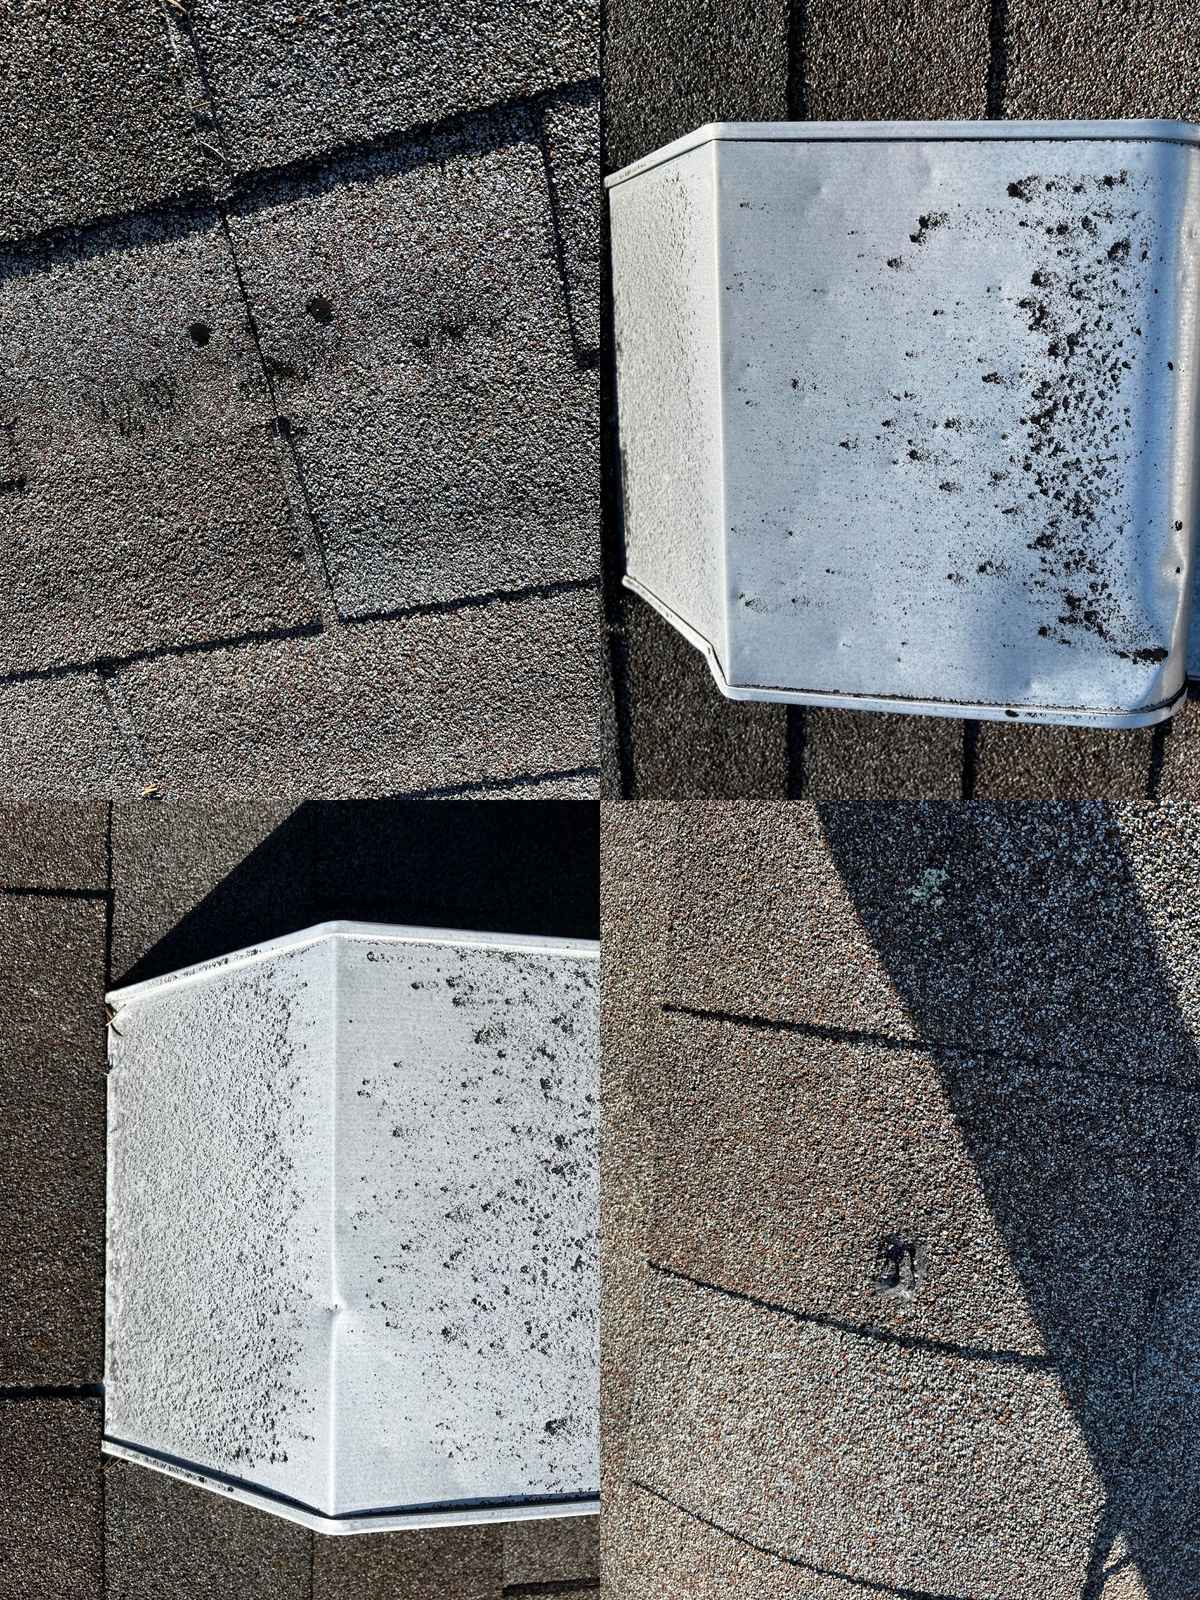 What are roof leaks